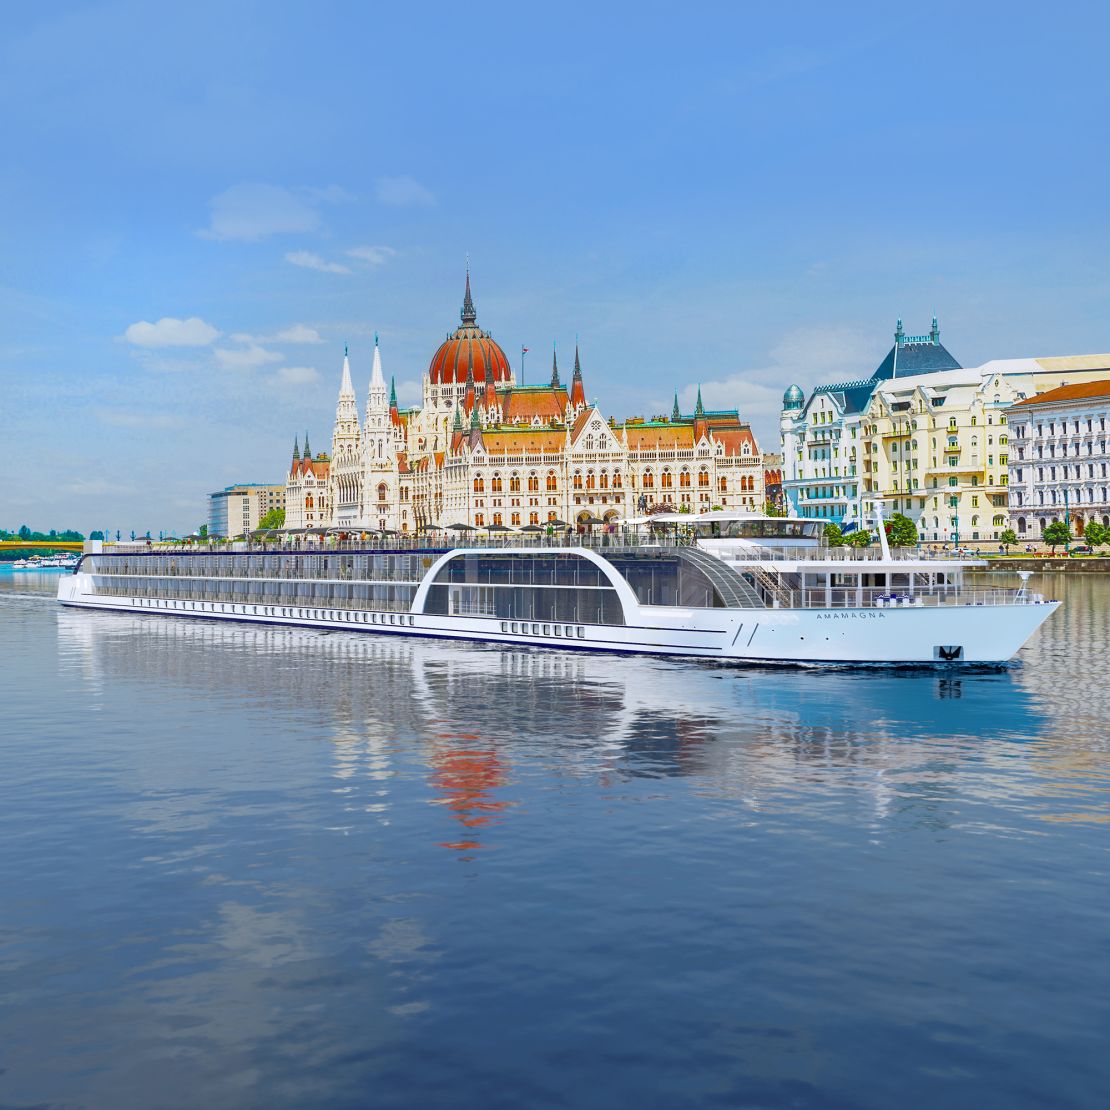 AmaWaterways won for Best River Cruise Line and for Best New River Cruise Ship, the AmaMagna. 